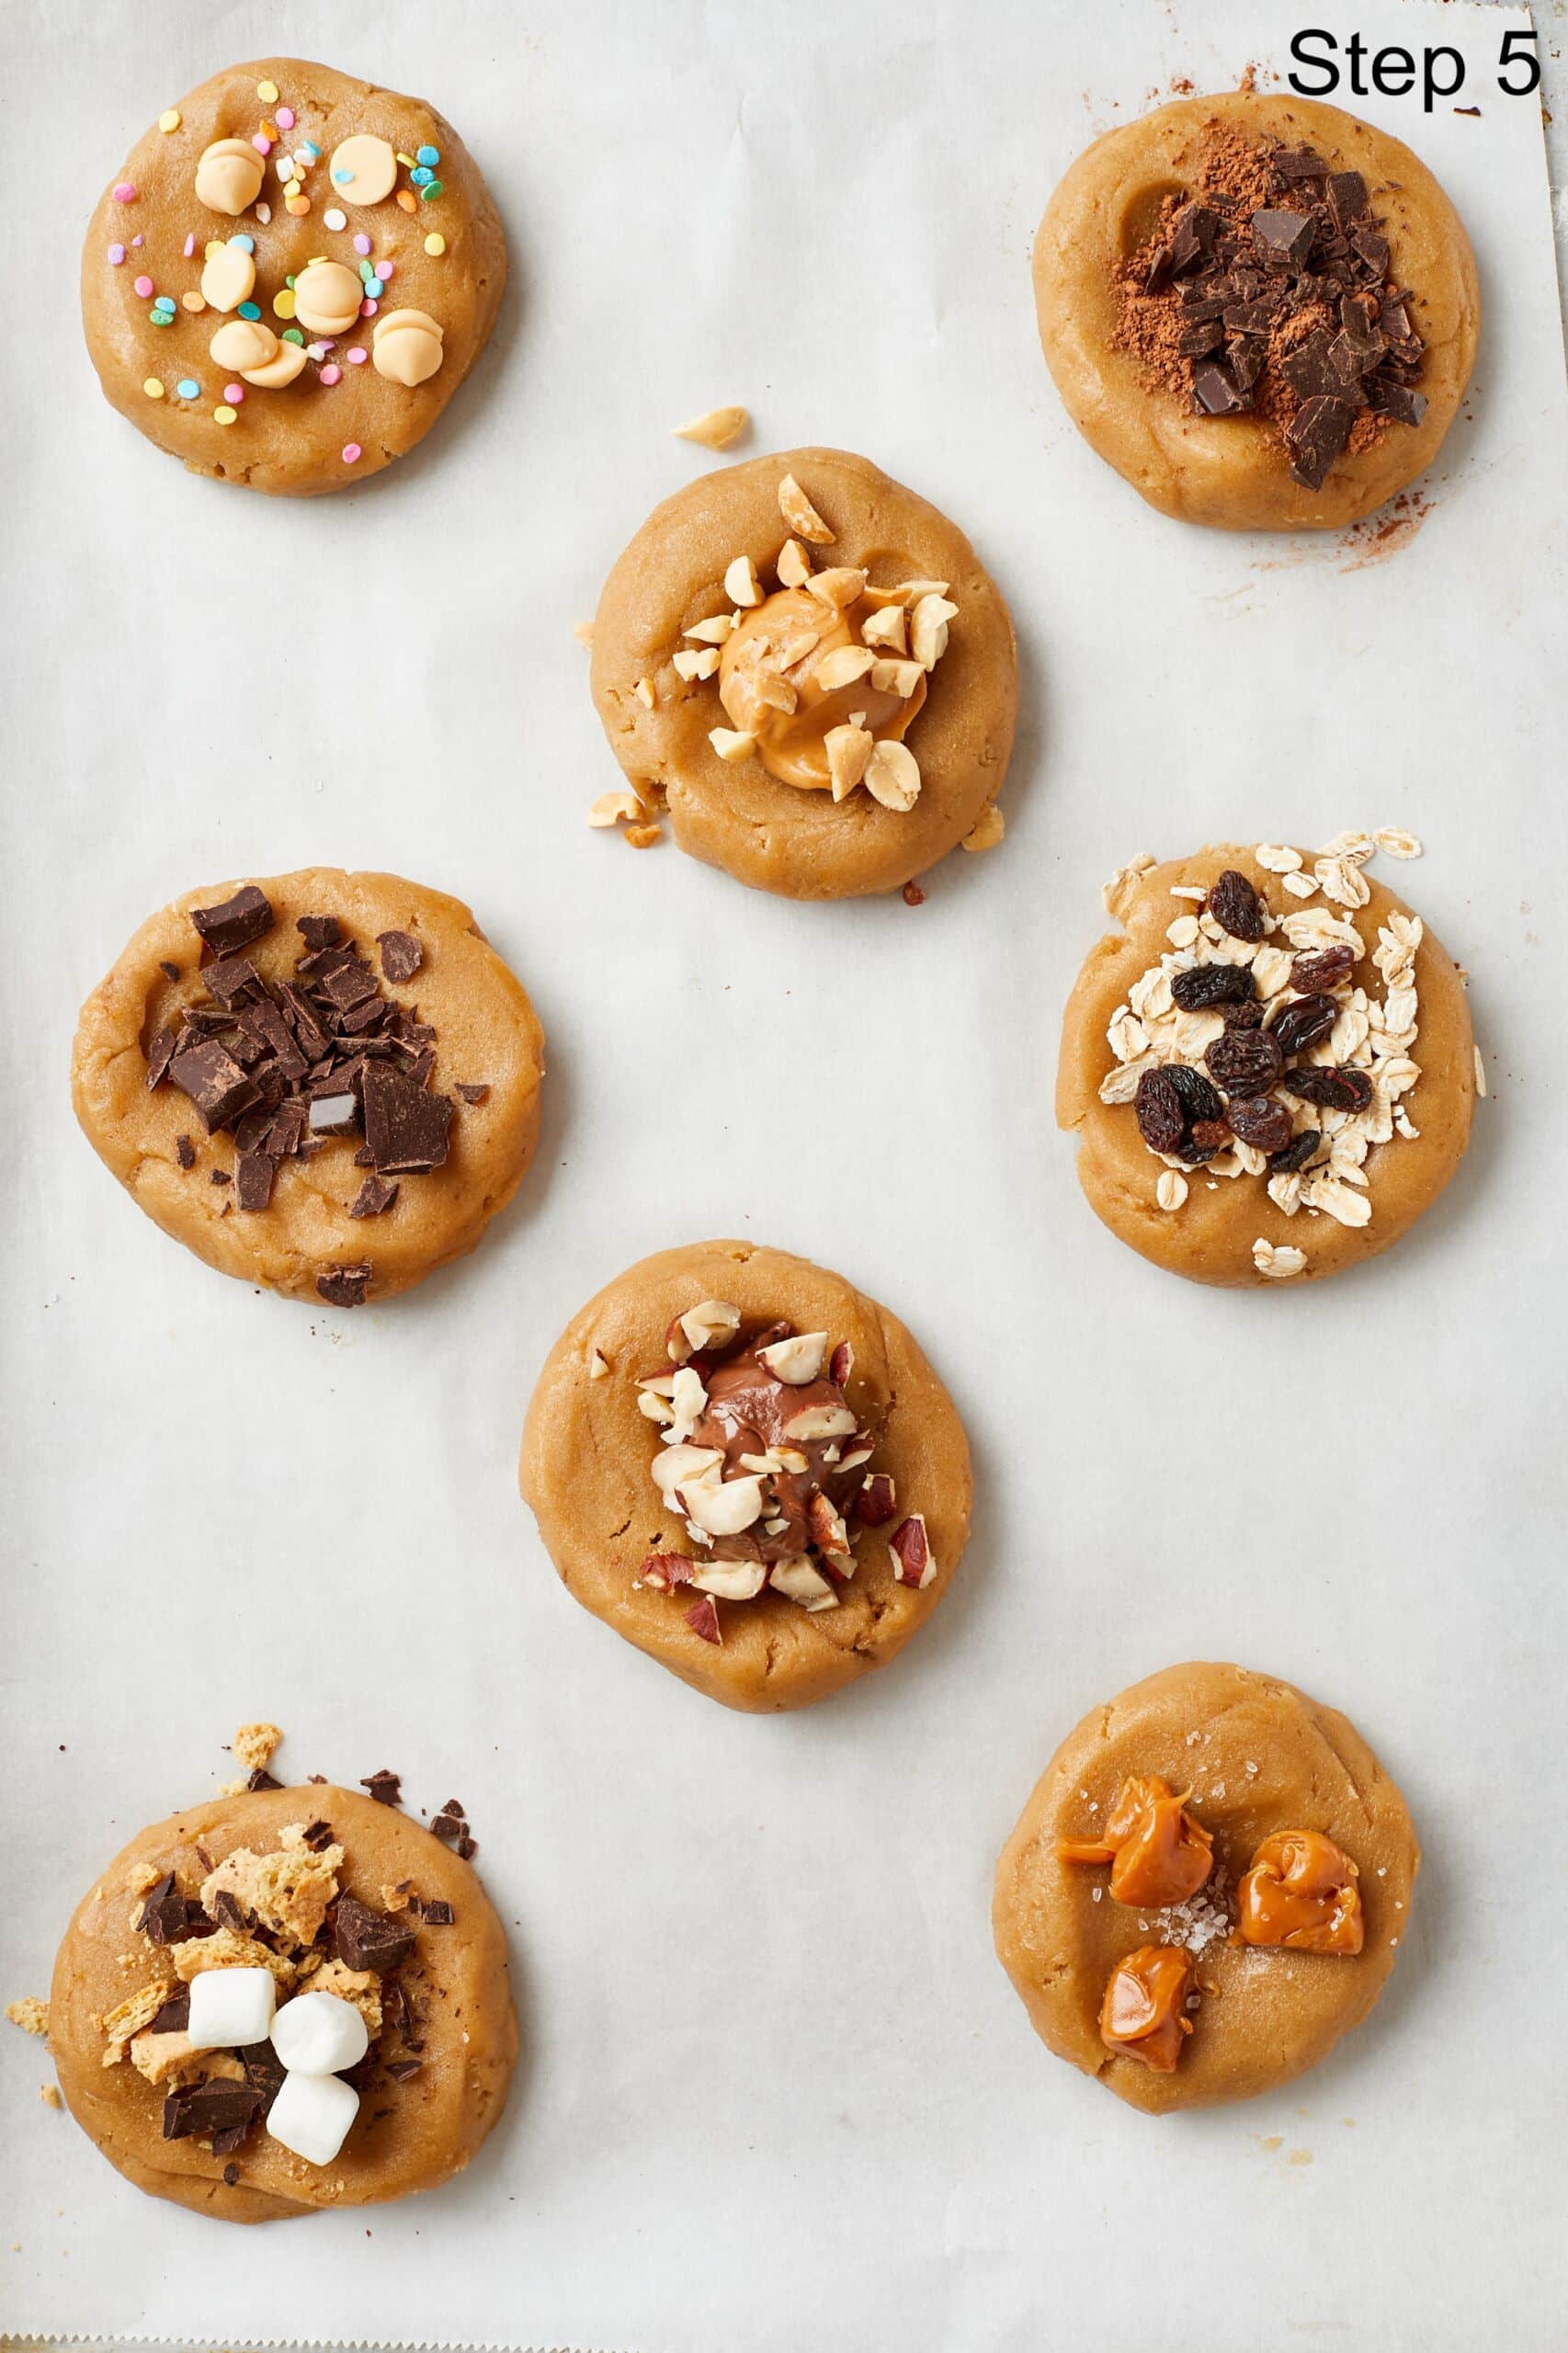 Step-by-step instructions on How to Make Cookie Dough Recipe With Endless Mix-ins: For each flavor, make a well in the center of a portion of dough. Add the mix-ins of your choice and fold the dough over itself a few times to ensure that the ingredients are incorporated.